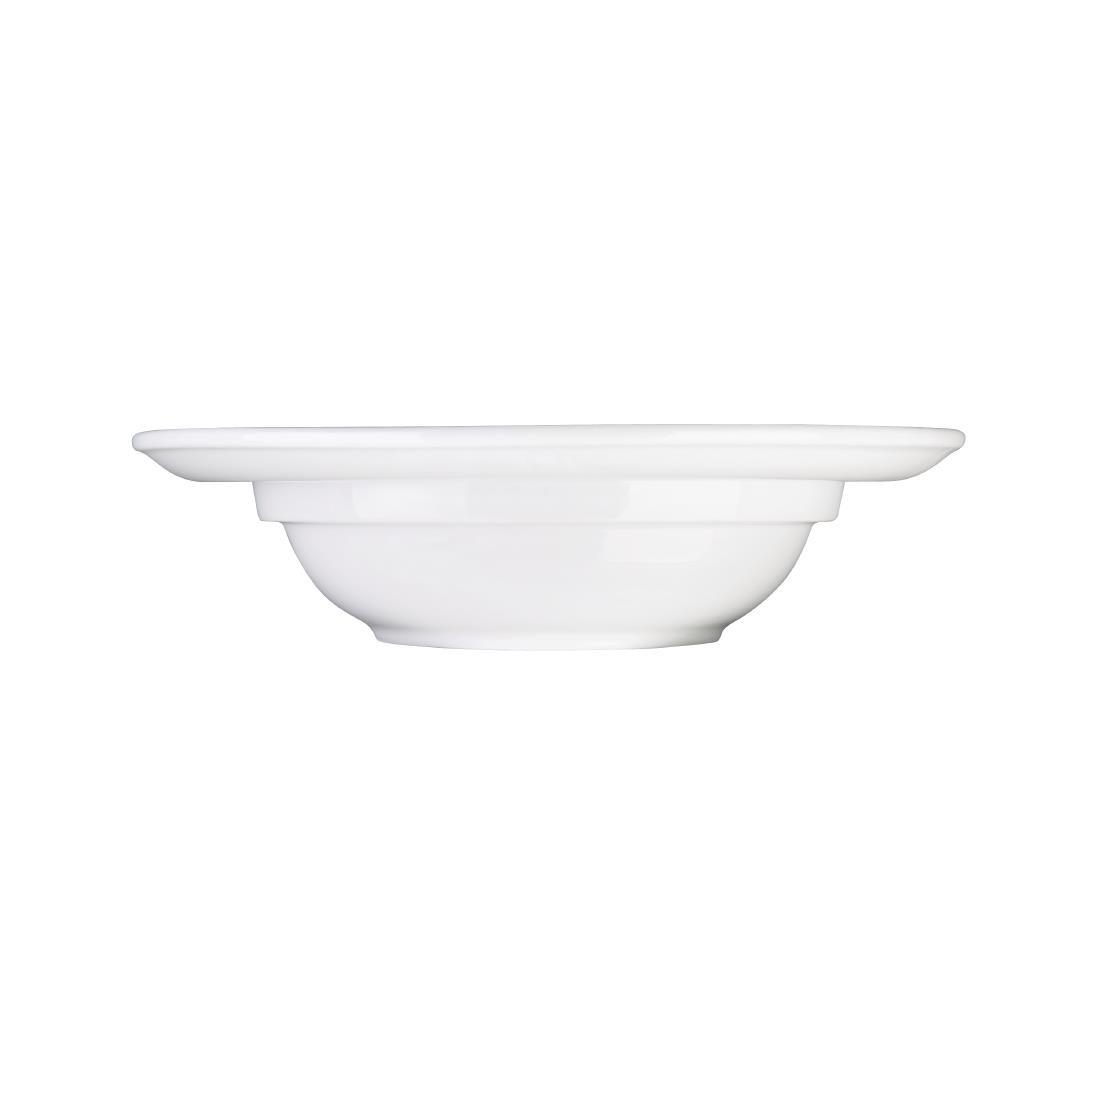 Olympia Heritage Raised Rim Bowls 205mm White (Pack of 4) - DW154  - 3